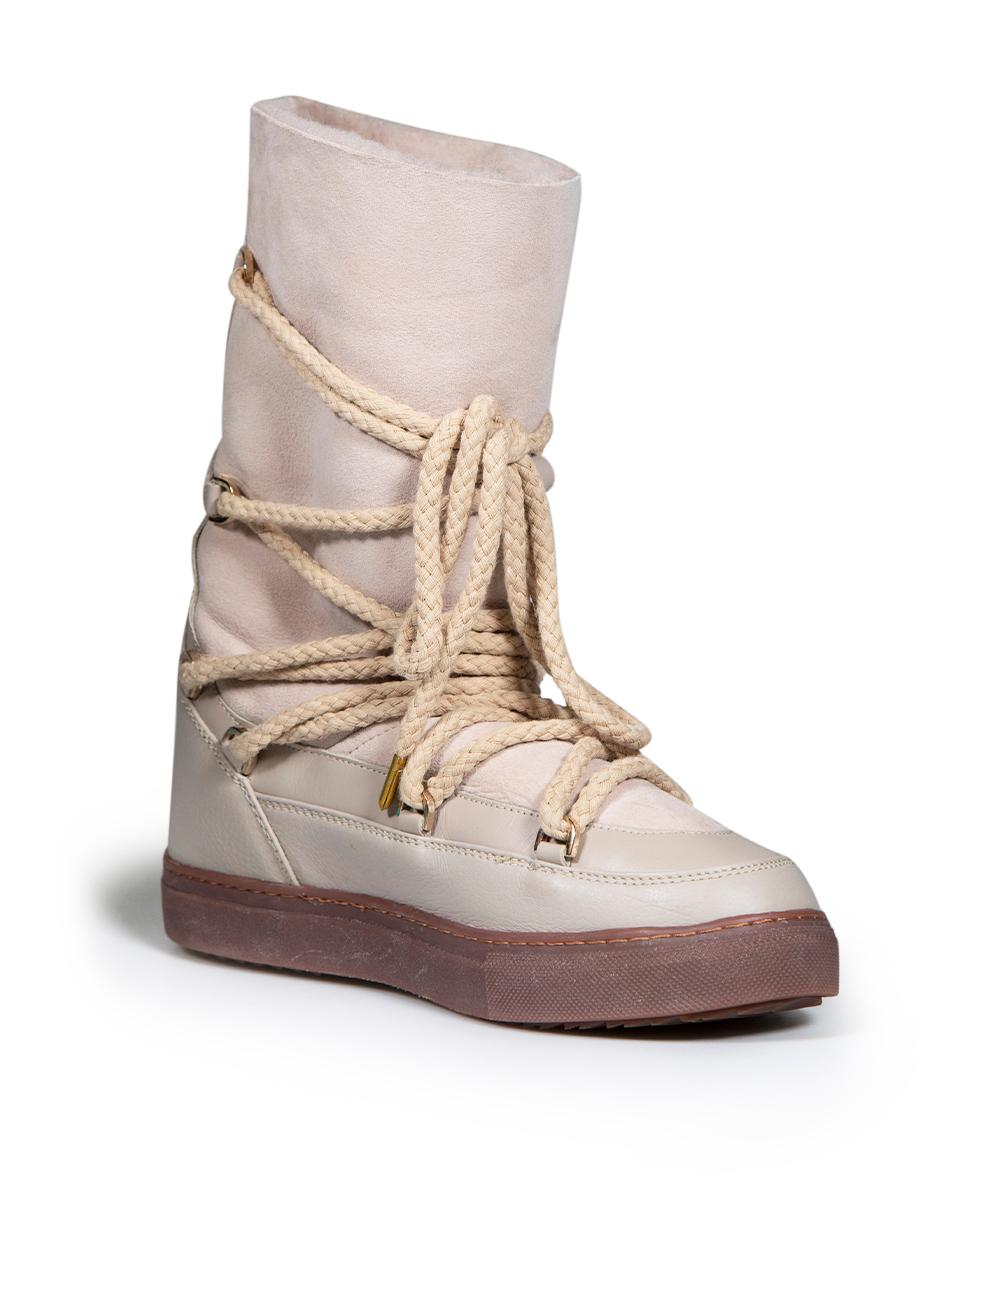 CONDITION is Never worn. No visible wear to boots is evident, however there is a small mark to the right-side of the right boot due to poor storage on this new Inuikii designer resale item.
 
 
 
 Details
 
 
 Beige
 
 Suede
 
 Boots
 
 Round toe
 
